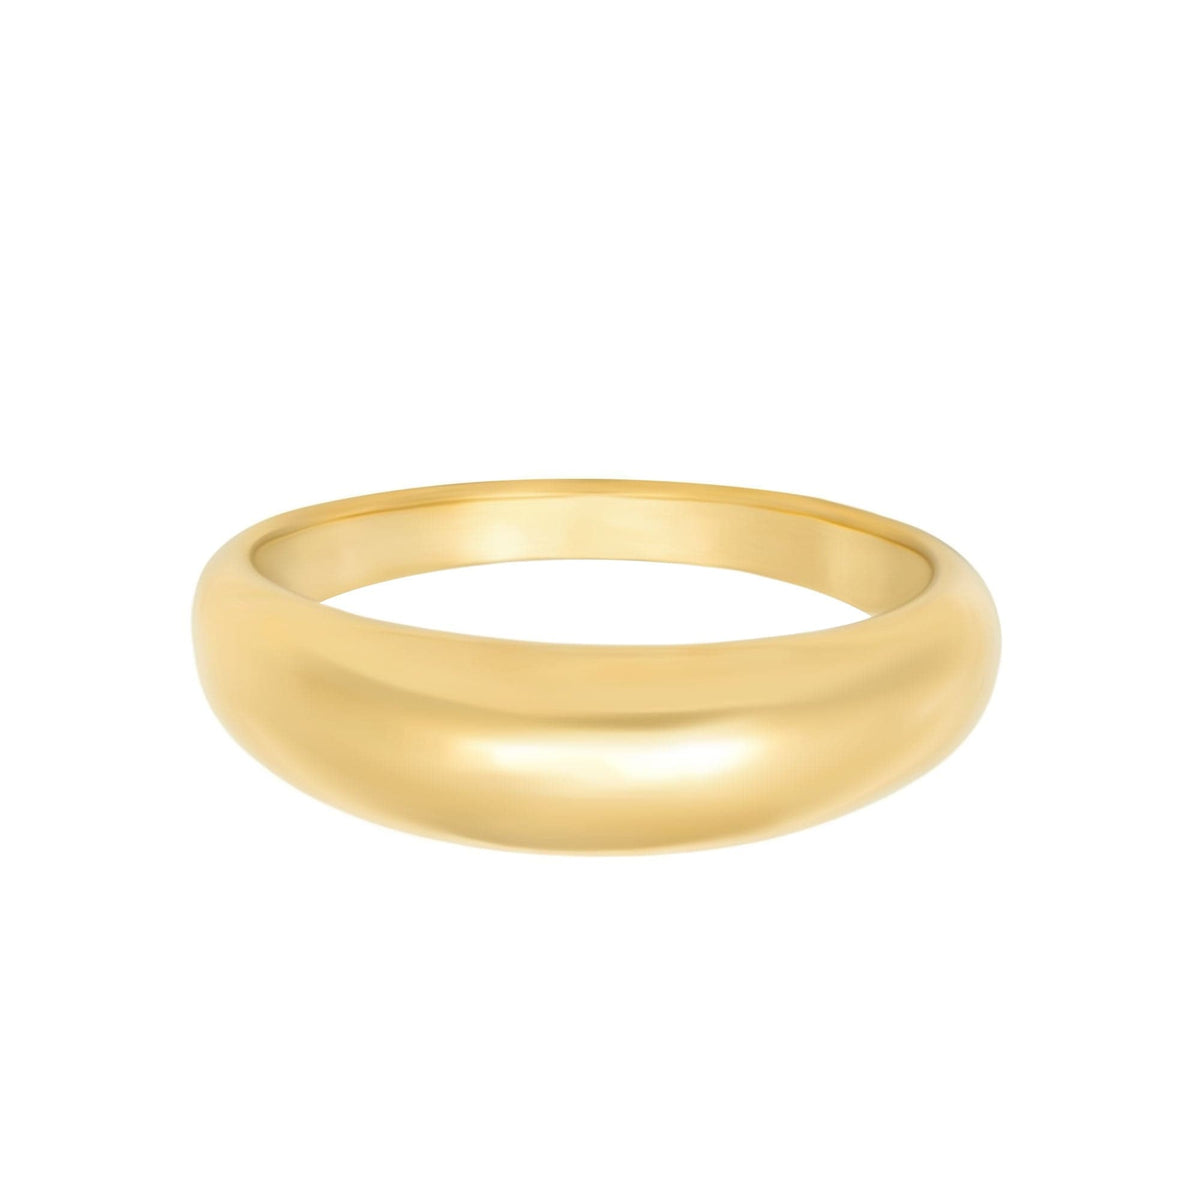 BohoMoon Stainless Steel Golden Ring Gold / US 5 / UK J / EUR 49 (x small)